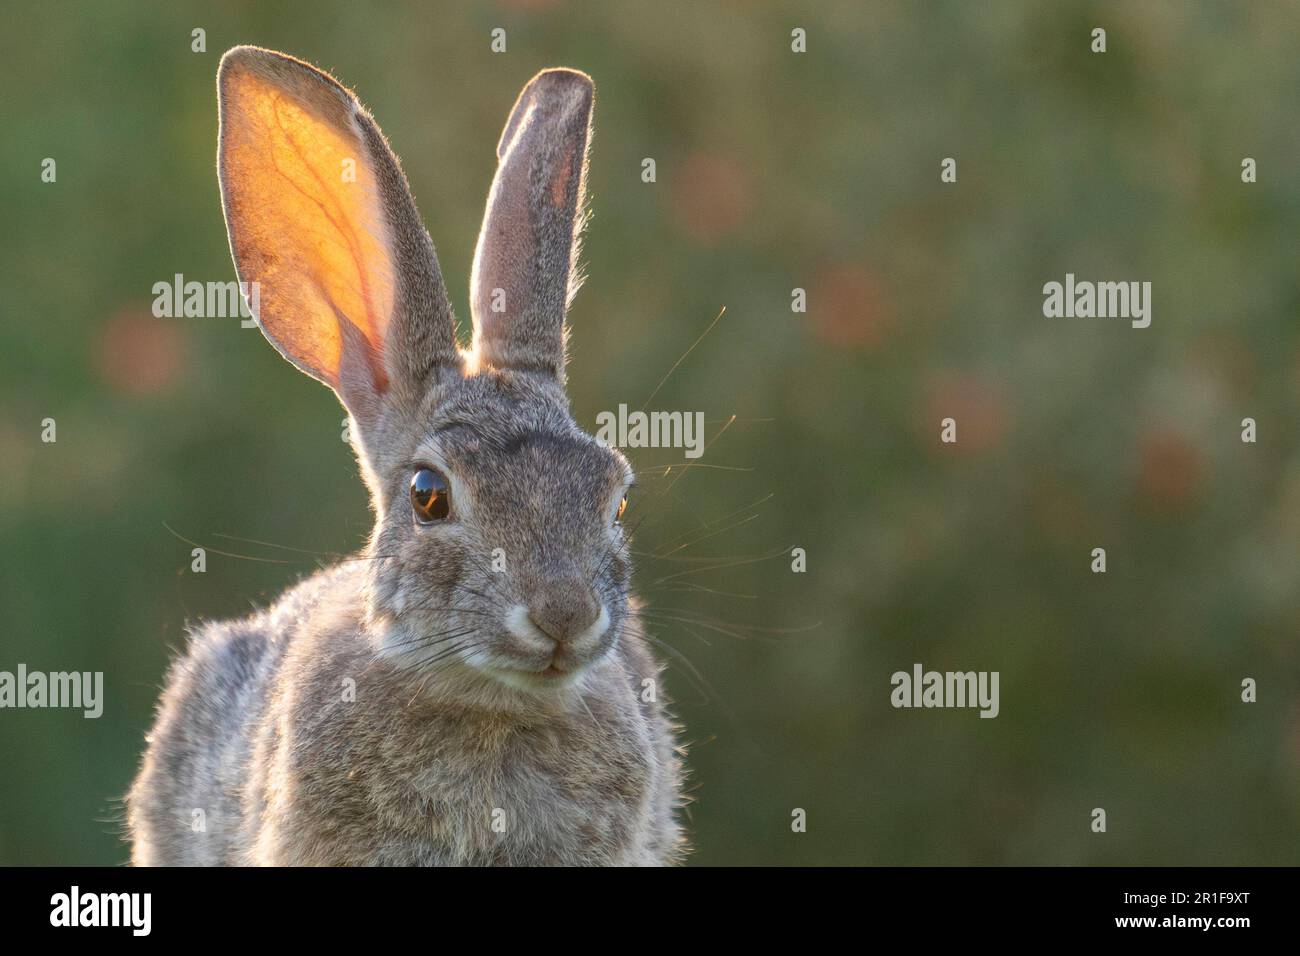 Closeup image of a Desert Cottontail rabbit with translucent, backlit ears Stock Photo